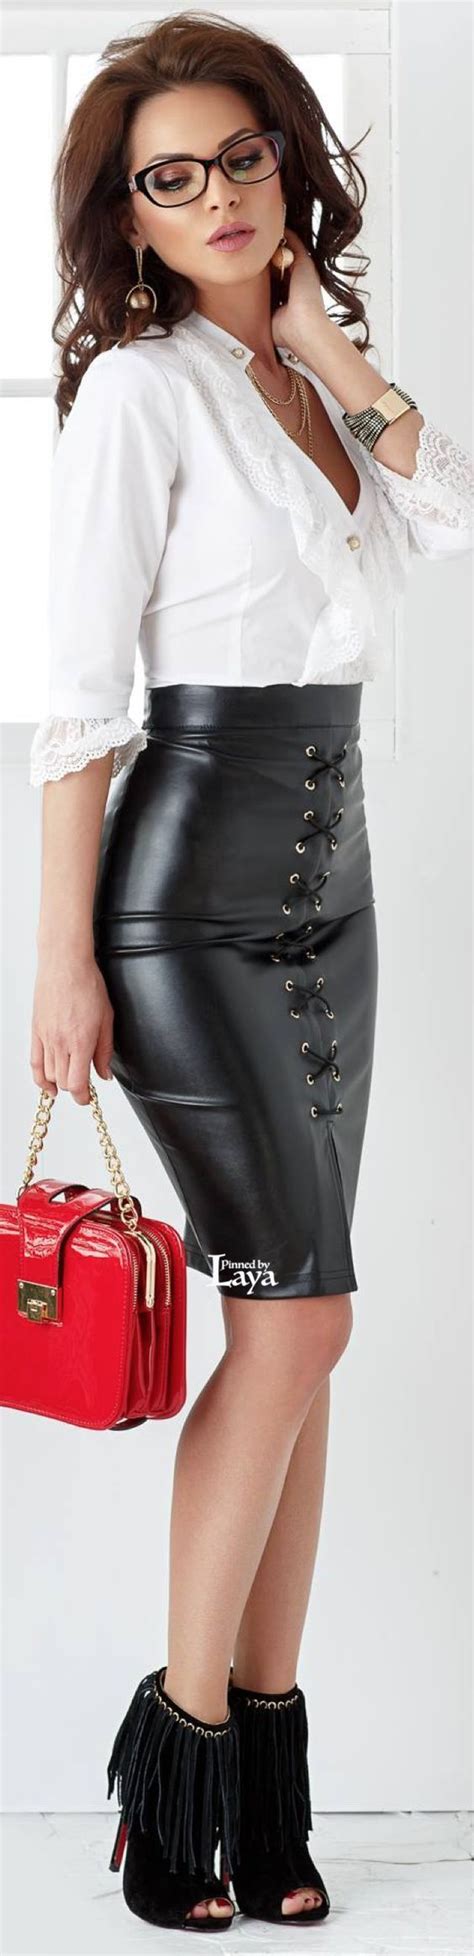 black leather skirts leather outfit leather and lace leather fashion